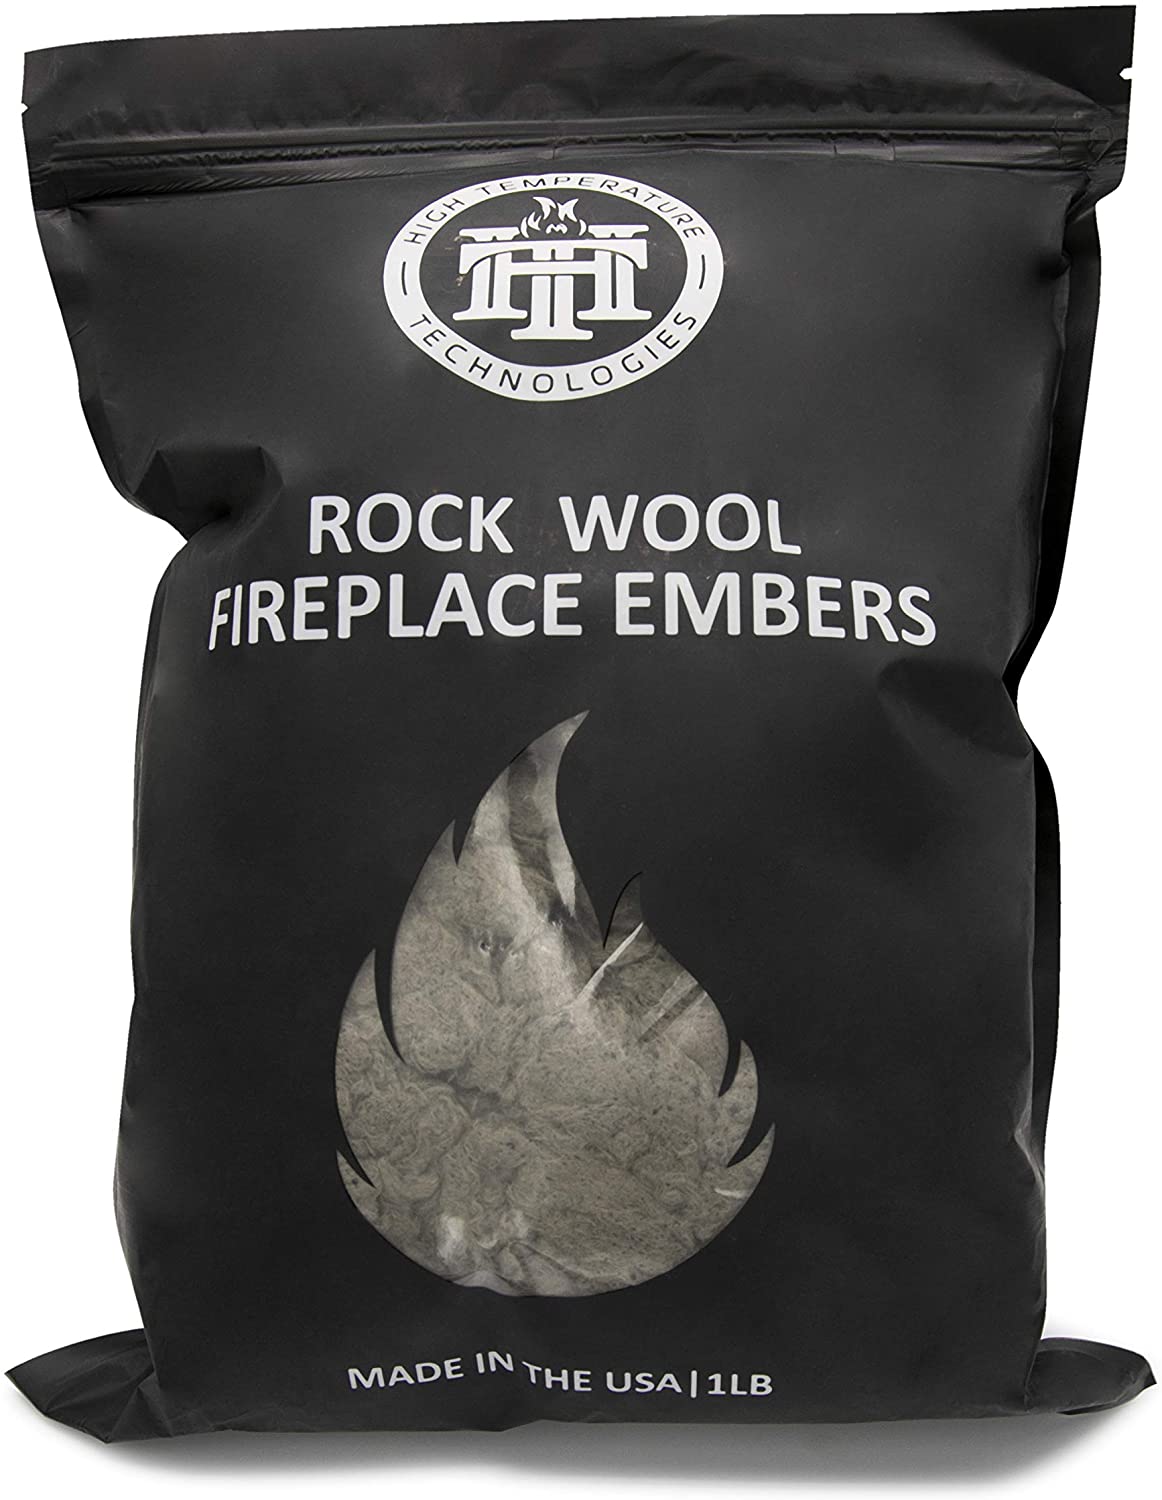 Gas Fireplace Rock Beautiful Replacement Rock Wool Embers for Gas Fireplaces Gas Logs 16 Oz Bag 1 M